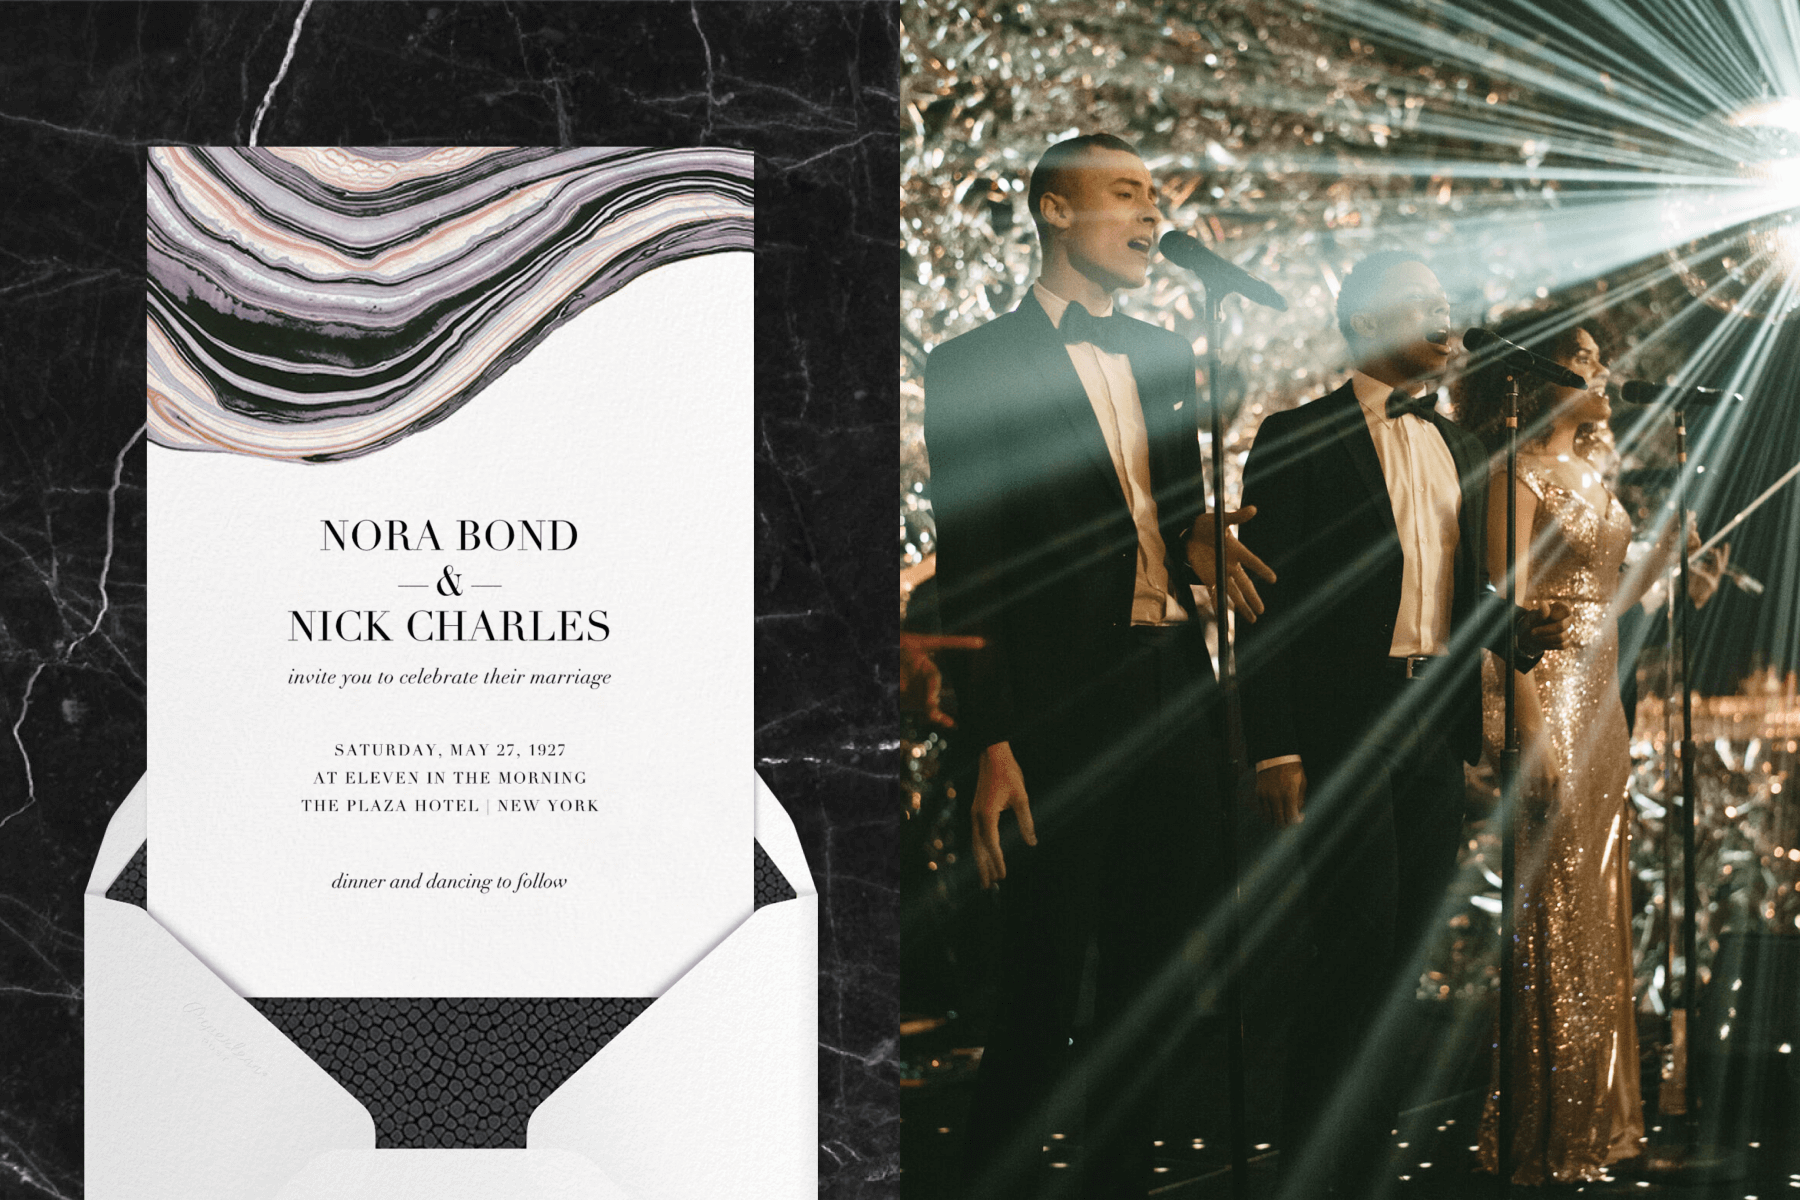 Left: A white wedding invitation with a pink, purple, and black marbled pattern on the top on a black marble backdrop. Right: Three singers, two in tuxedos and one in a gold sequin gown, sing at microphones with a disco ball shining on them and a metallic backdrop.